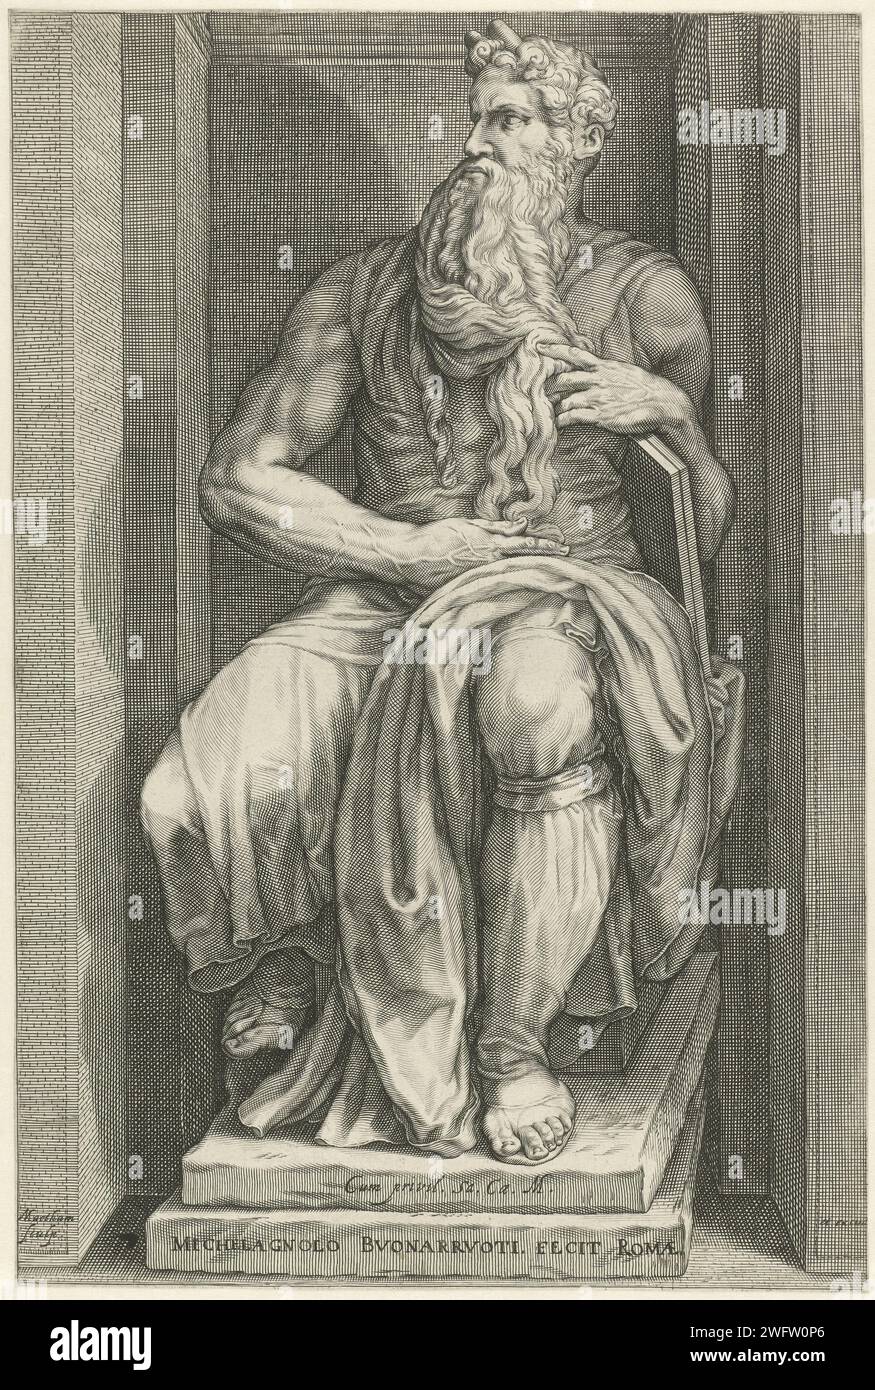 Seated Moses, Jacob Matham, After Michelangelo, 1601 - 1605 print Moses, sitting, with the ten command tables under his arm, to the sculpture of Michelangelo on the grave of Julius II in the Basilica San Pietro in Vincoli in Rome. Haarlem paper engraving Moses (not in biblical context); possible attributes: rays of light or horns on his head, rod, Tables of the Law. piece of sculpture, reproduction of a piece of sculpture San Pietro in Vincoli Stock Photo